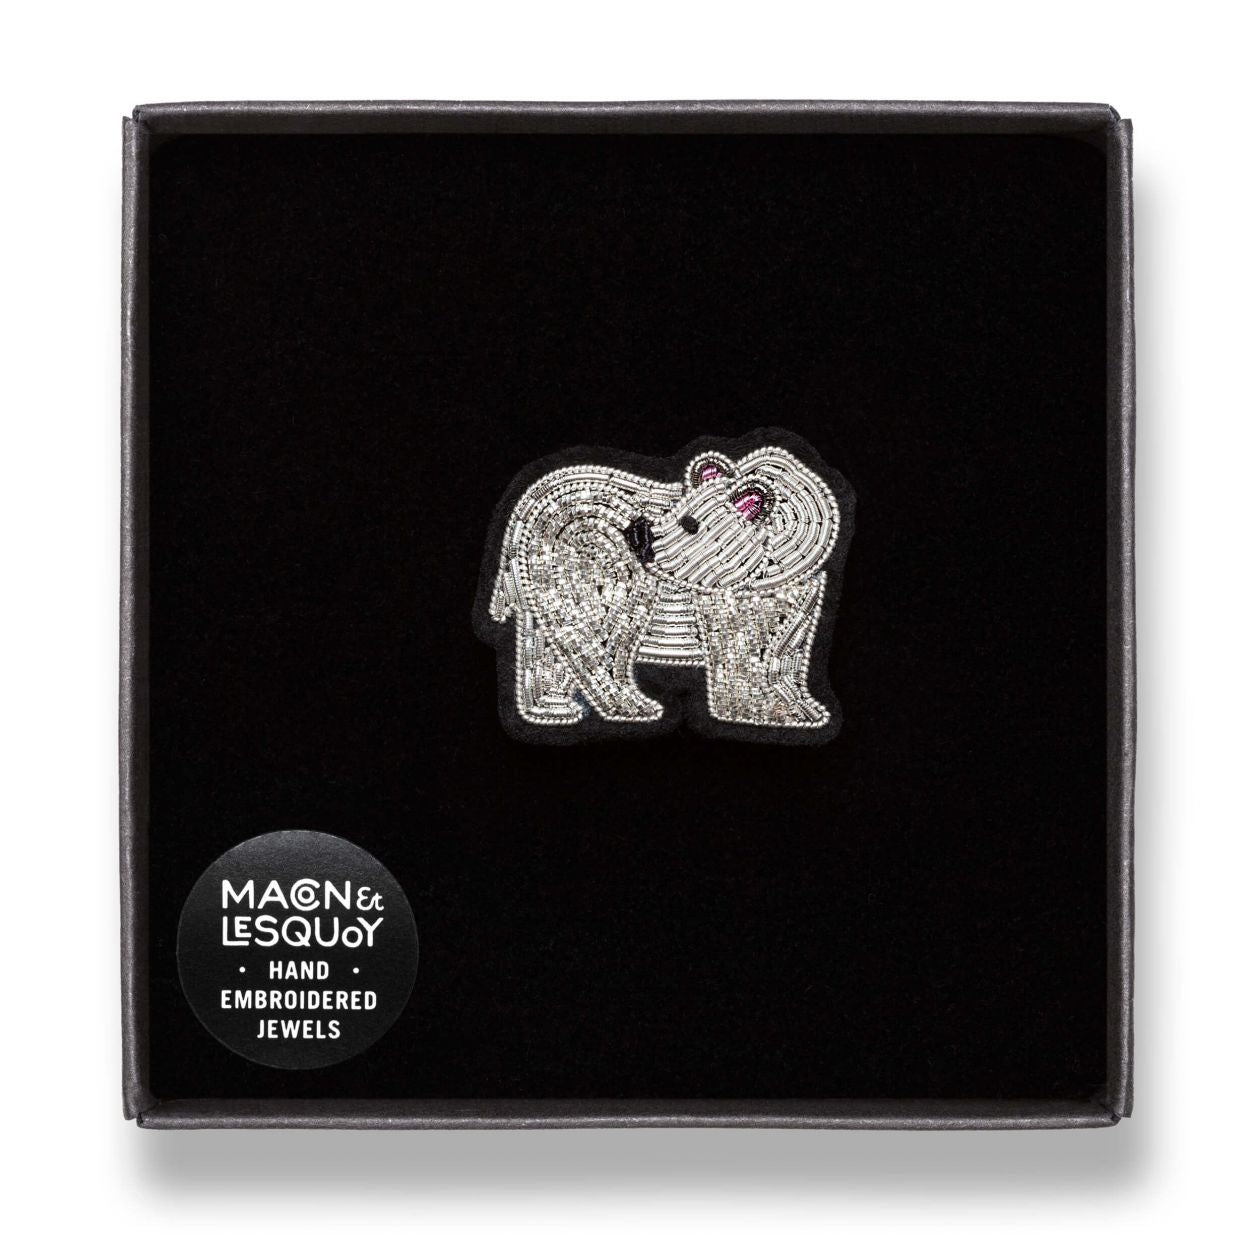 A cute and super-cool Polar Bear hand-embroidered decorative lapel pin in a presentation box From Macon & Lesquoy, French Hand Embroidered badges and patches using Cannetille thread.